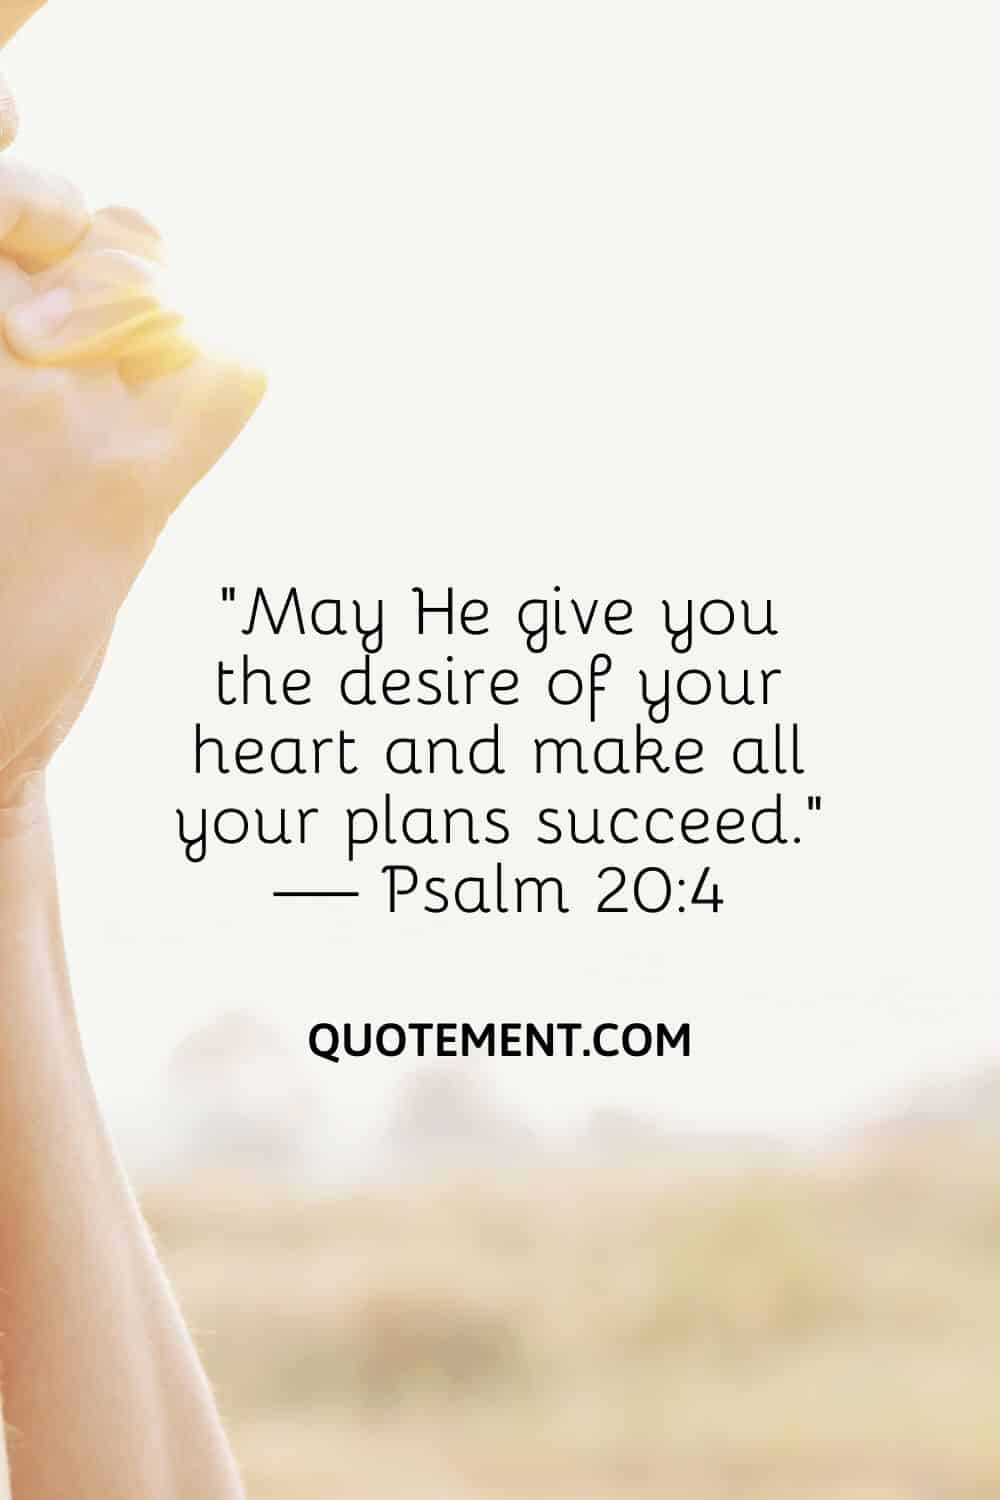 “May He give you the desire of your heart and make all your plans succeed.” — Psalm 204